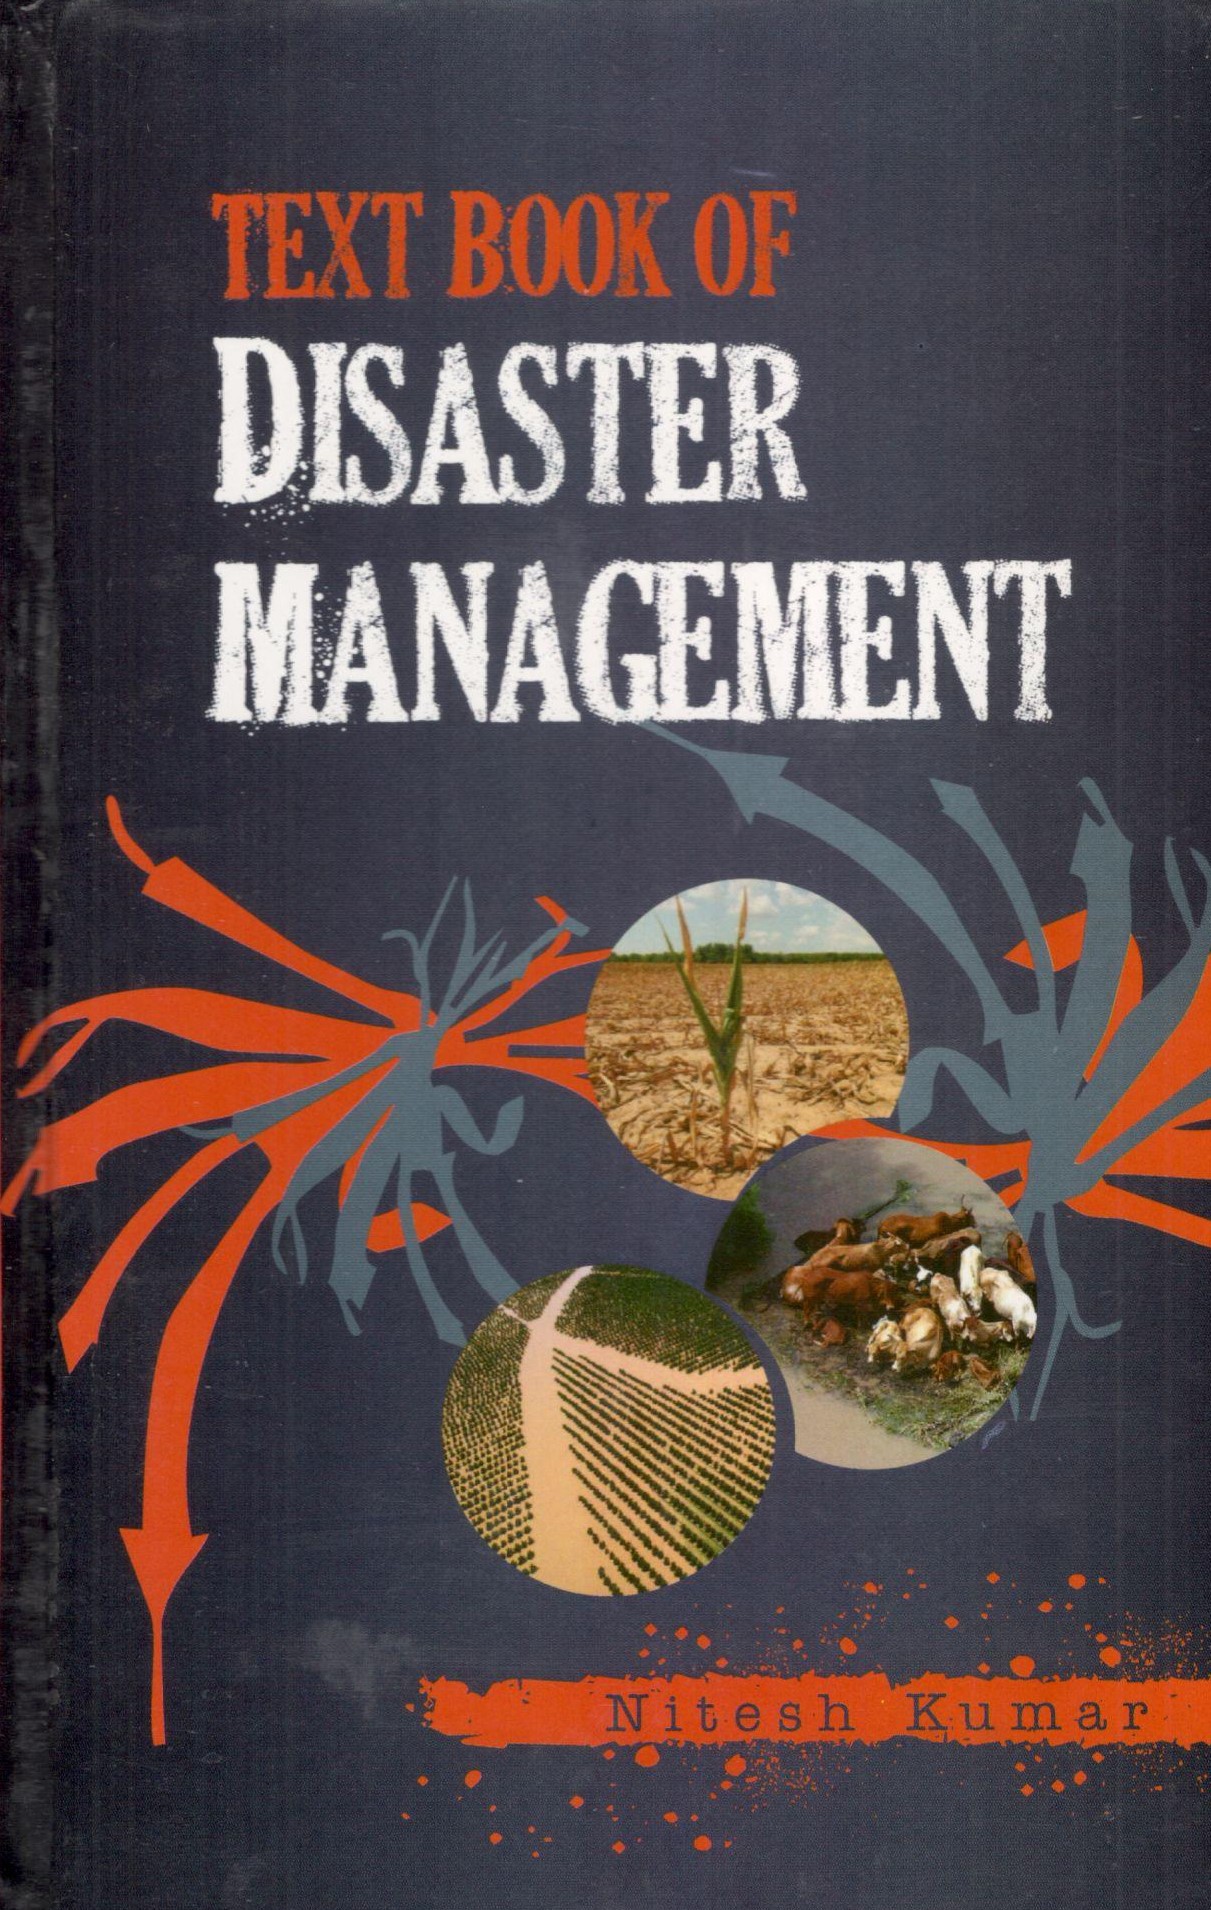 write an article on disaster management